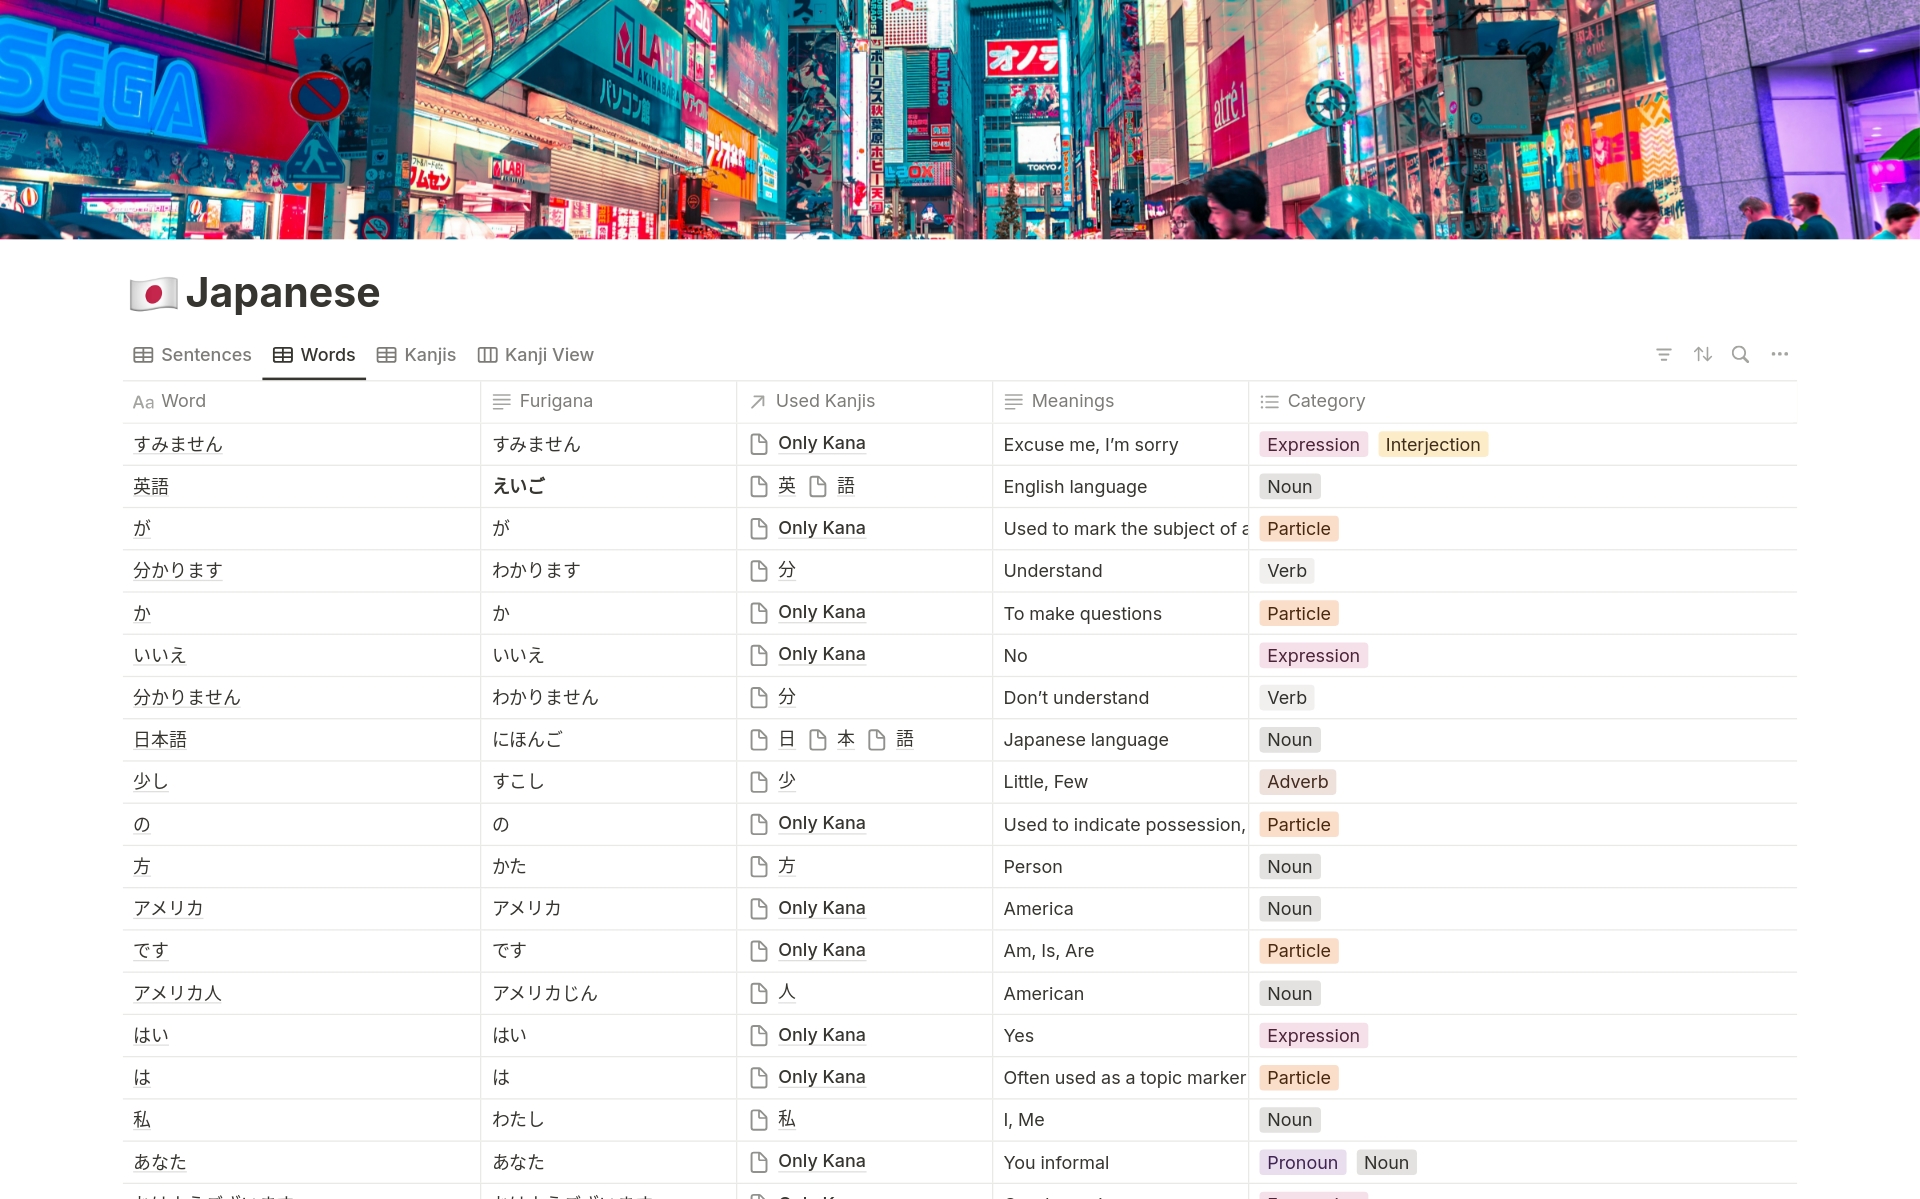 Explore the world of the Japanese language in an organized and efficient way with our exclusive Notion template for Japanese language learning! This vocabulary system is designed for those who want to master Japanese in a systematic and interactive manner.